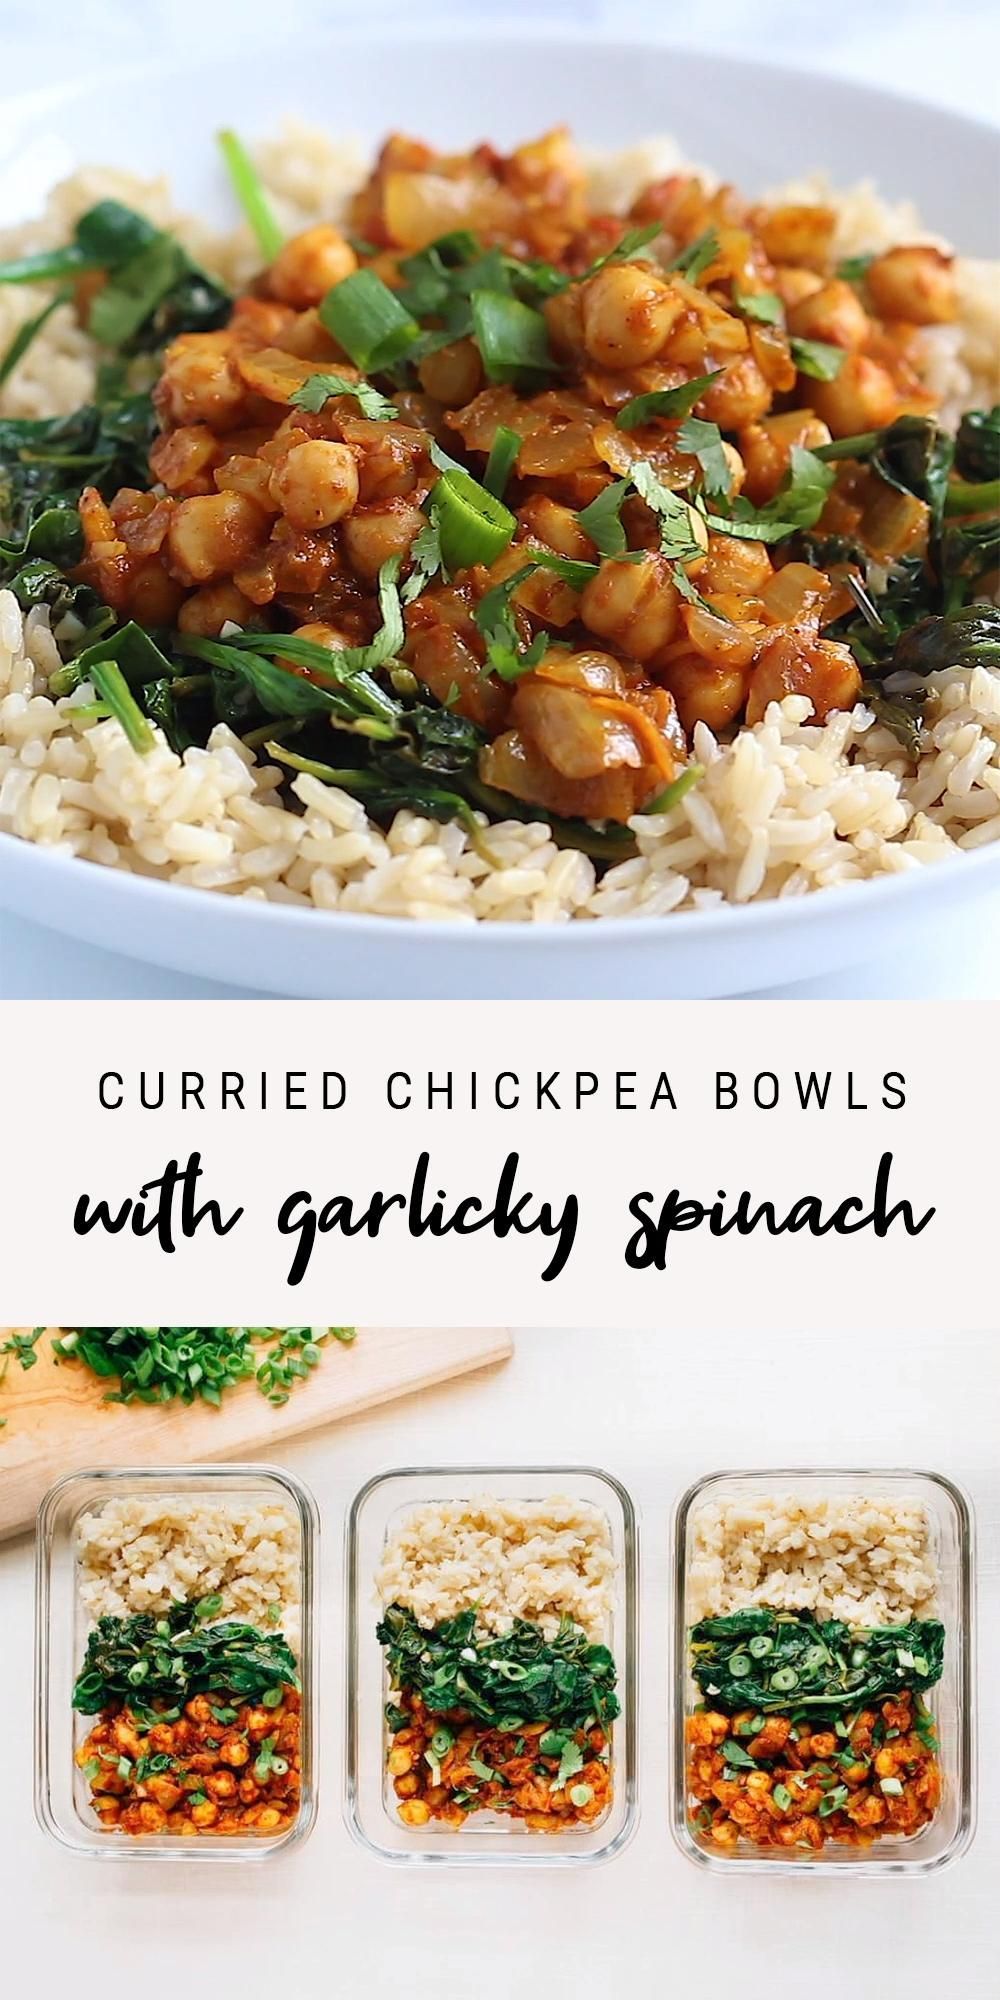 Vegan Curried Chickpea Bowls with Garlicky Spinach | Meal Prep - Vegan Curried Chickpea Bowls with Garlicky Spinach | Meal Prep -   18 meal prep recipes vegetarian lunch ideas